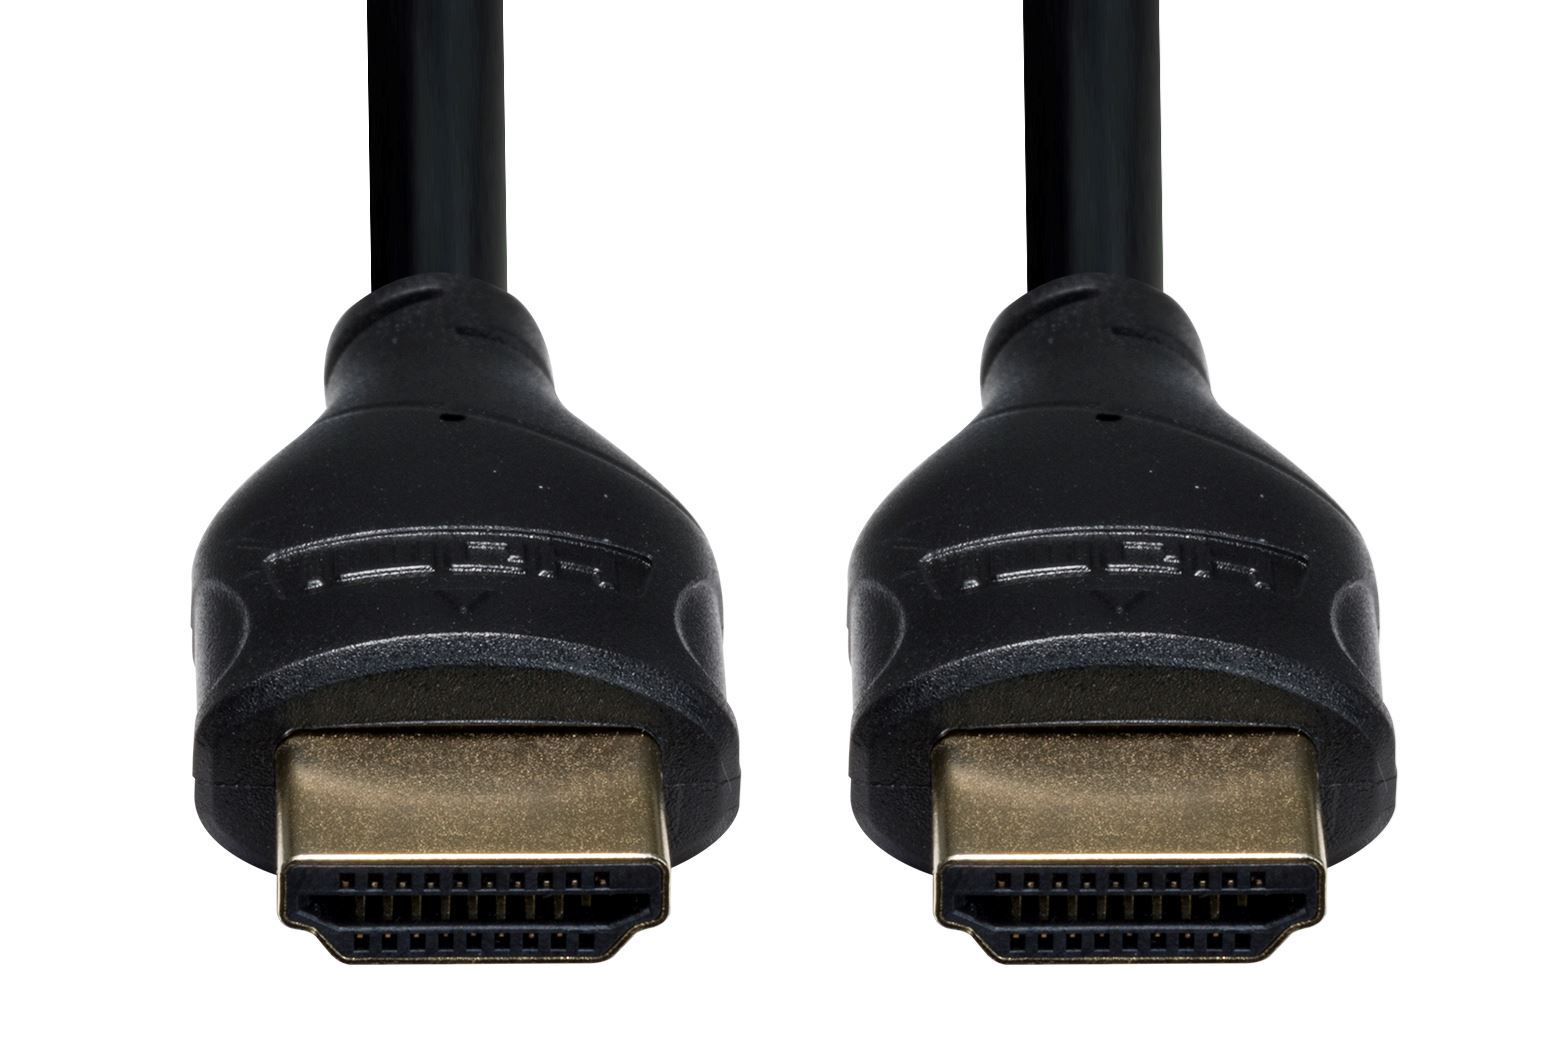 DYNAMIX_1m_HDMI_10Gbs_Slimline_High-Speed_Cable_with_Ethernet._Max_Res:_4K2K@24/30Hz_(3840x2160)_8_Audio_channels._8bit_colour_depth._Supports_CEC,_3D,_ARC,_Ethernet. 869